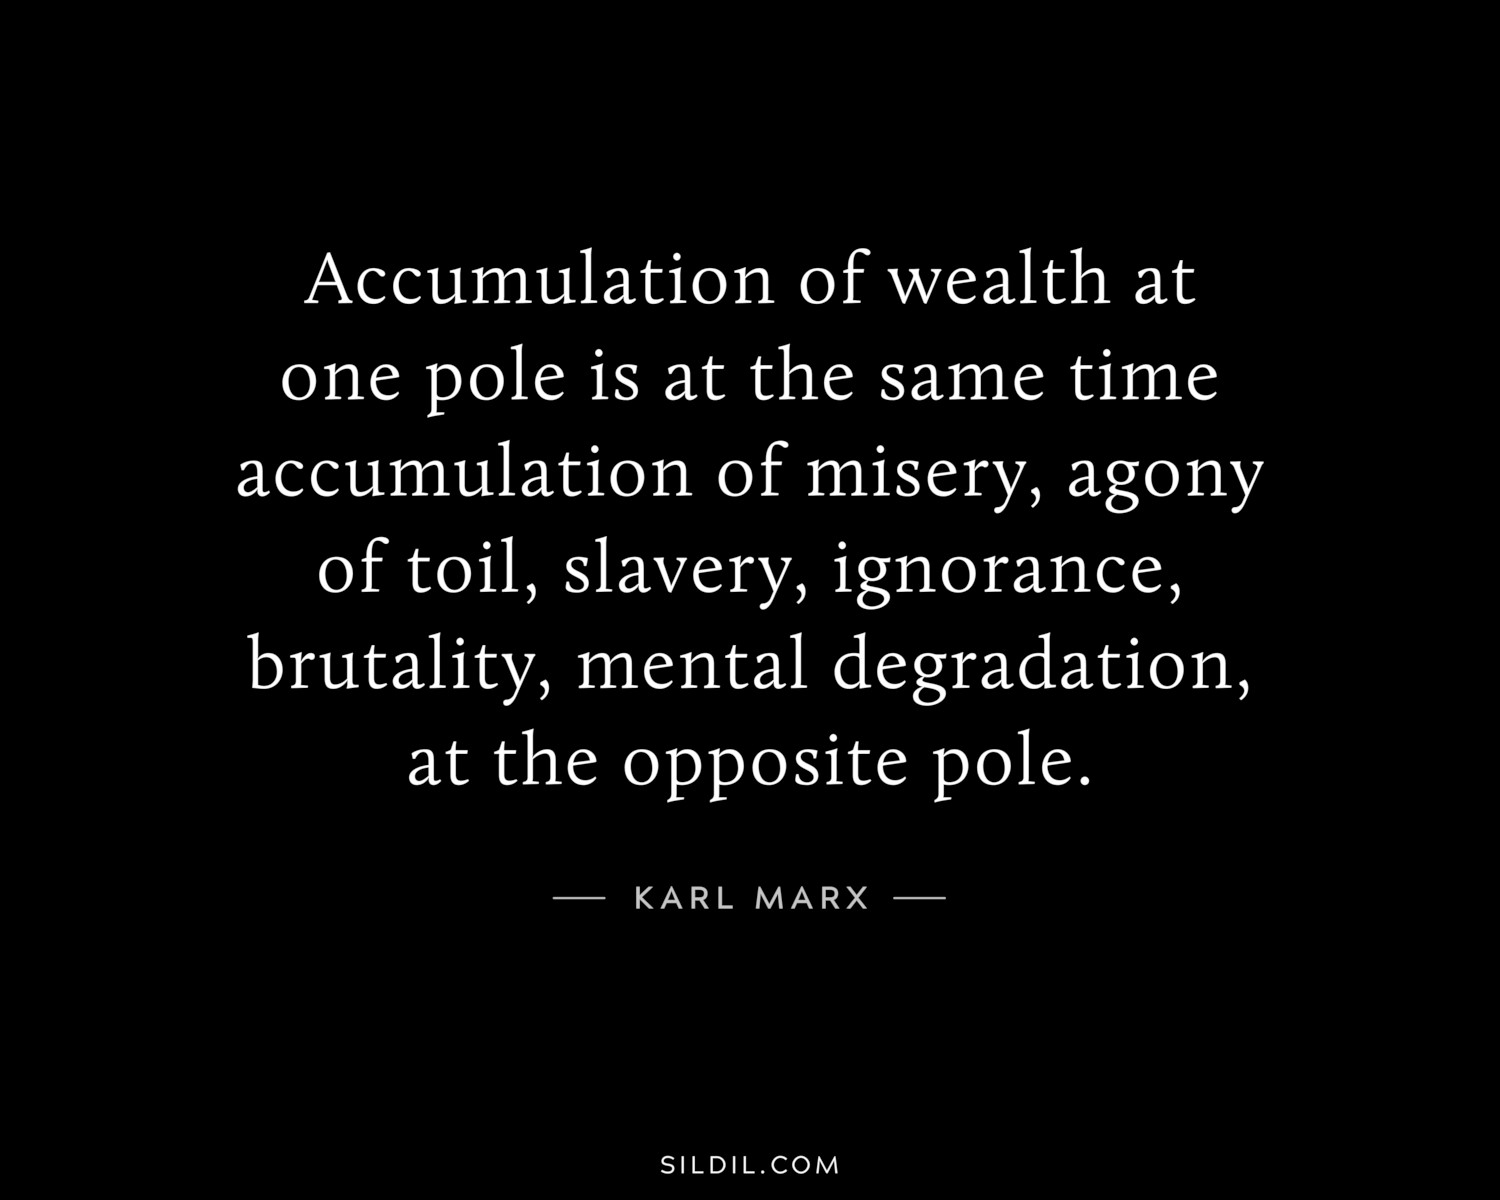 Accumulation of wealth at one pole is at the same time accumulation of misery, agony of toil, slavery, ignorance, brutality, mental degradation, at the opposite pole.